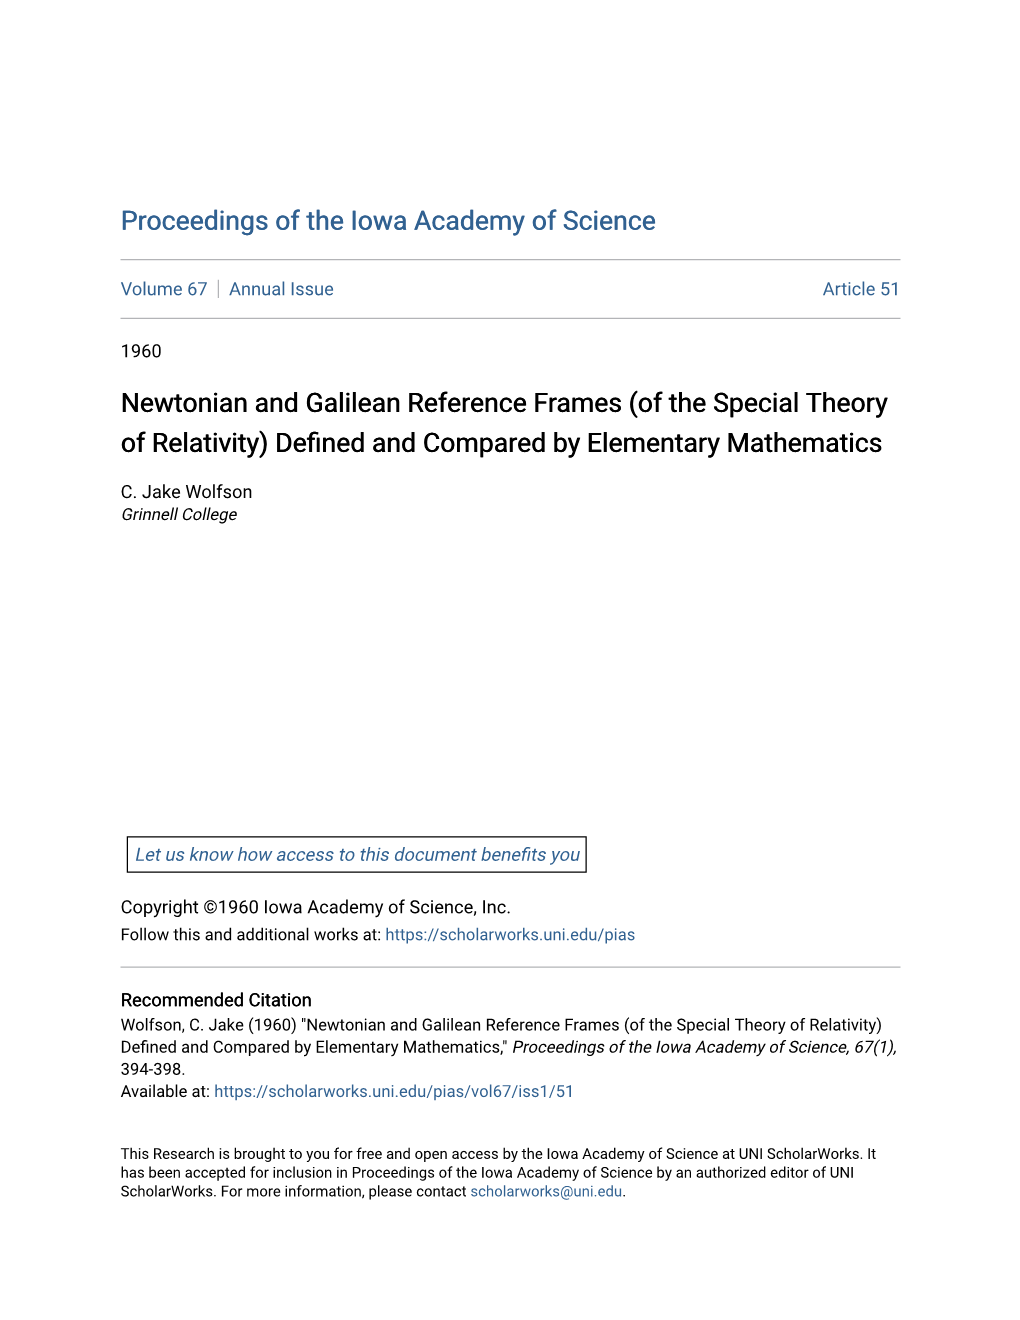 Newtonian and Galilean Reference Frames (Of the Special Theory of Relativity) Defined and Compared by Elementary Mathematics